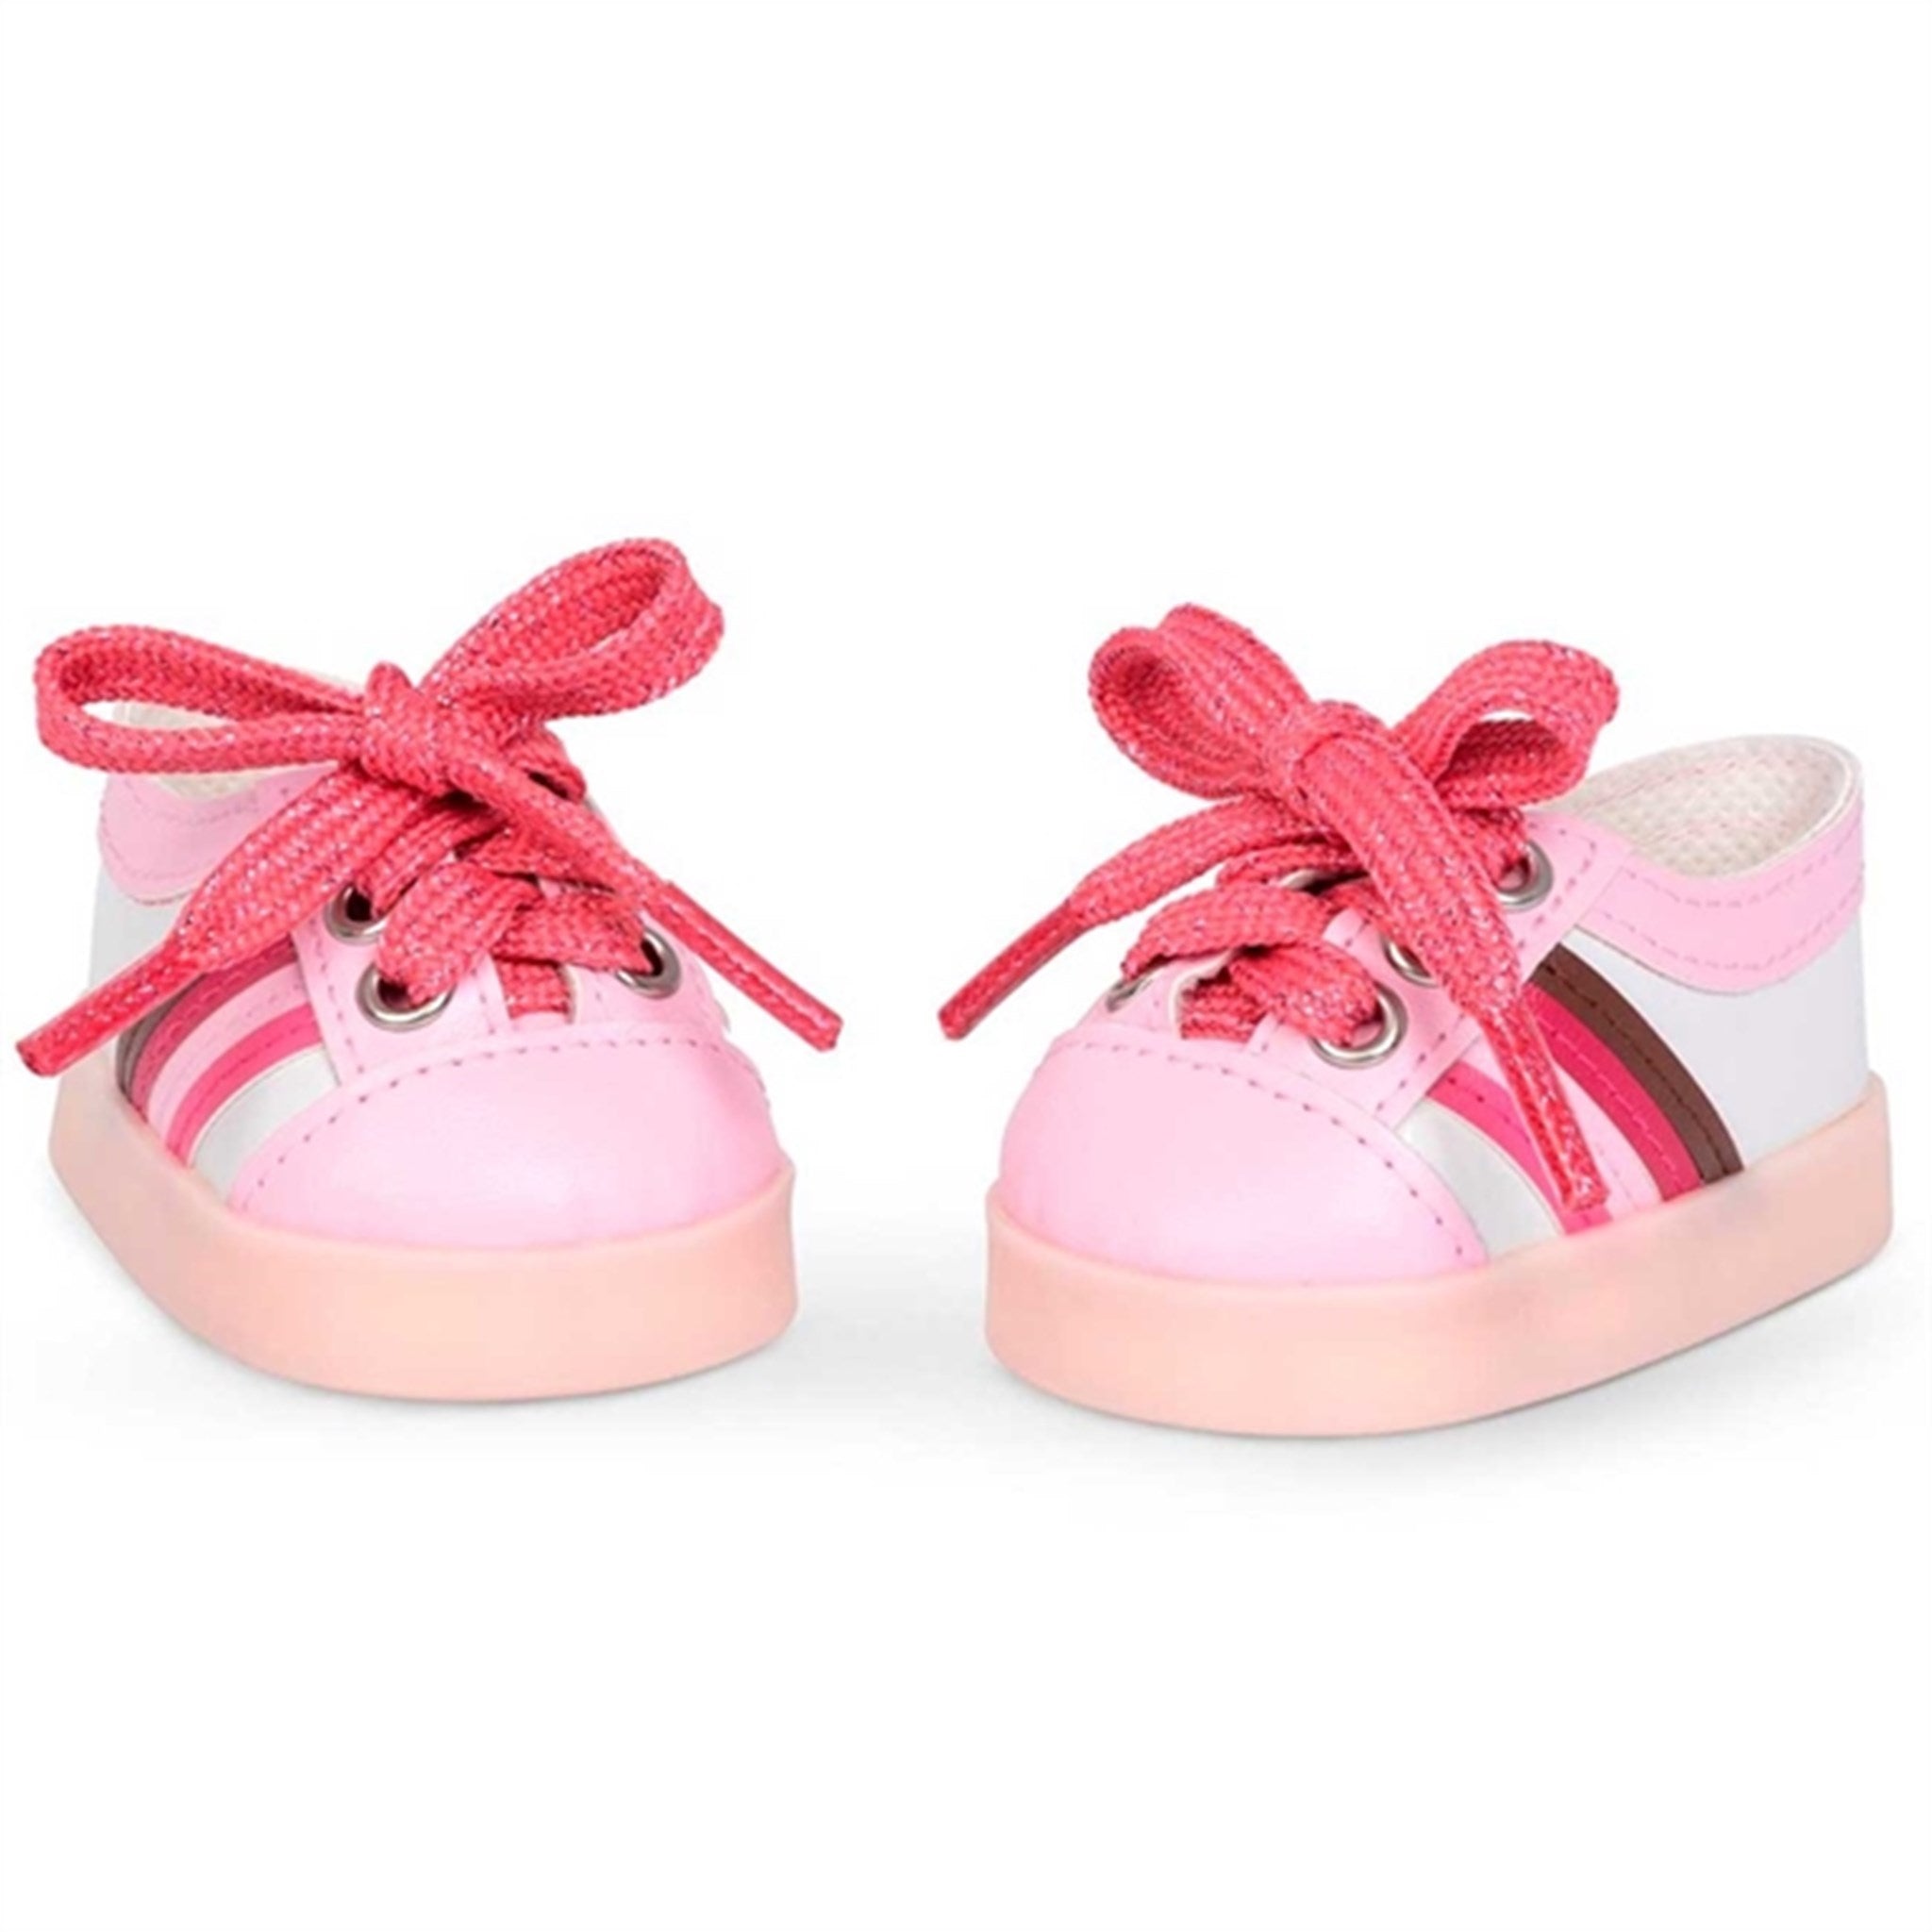 Our Generation Doll Shoes w. Light Pink